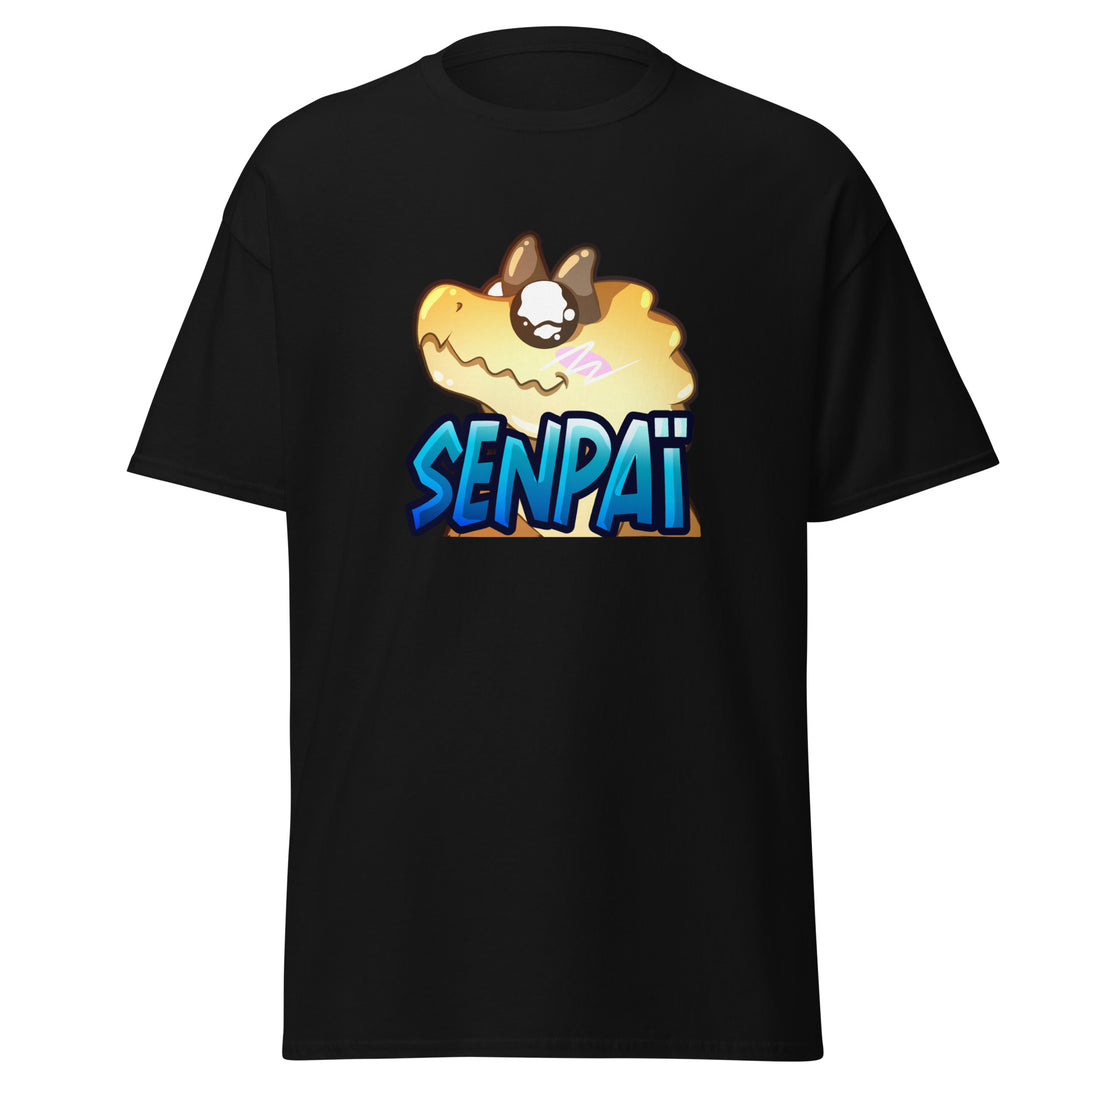 Dinosaure Senpaï T-Shirt - Soft, Comfortable, and Unique Design for Gamers and Streamers